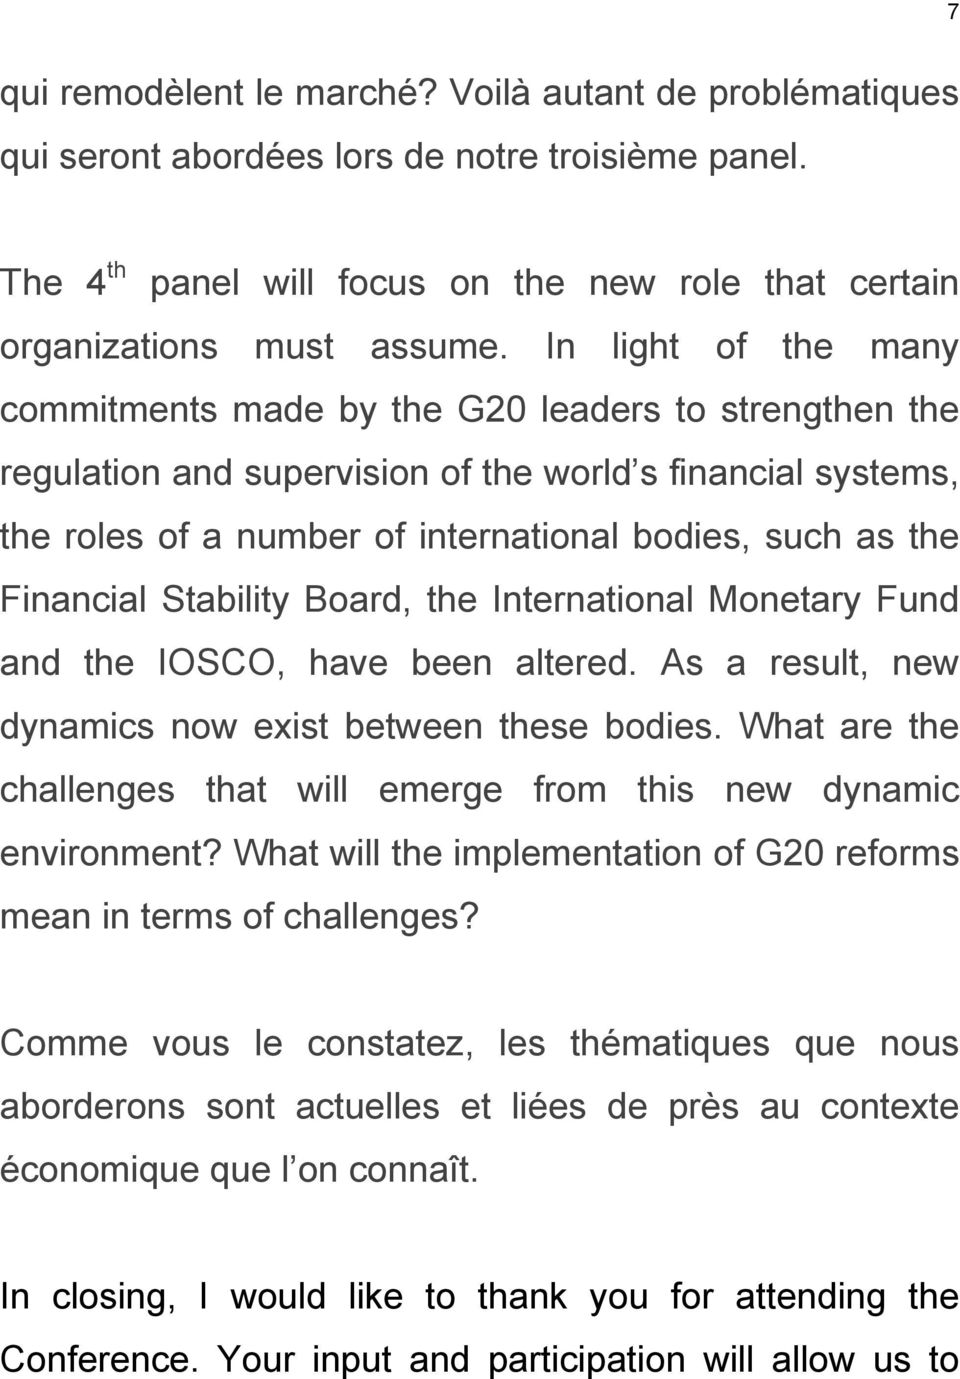 Financial Stability Board, the International Monetary Fund and the IOSCO, have been altered. As a result, new dynamics now exist between these bodies.